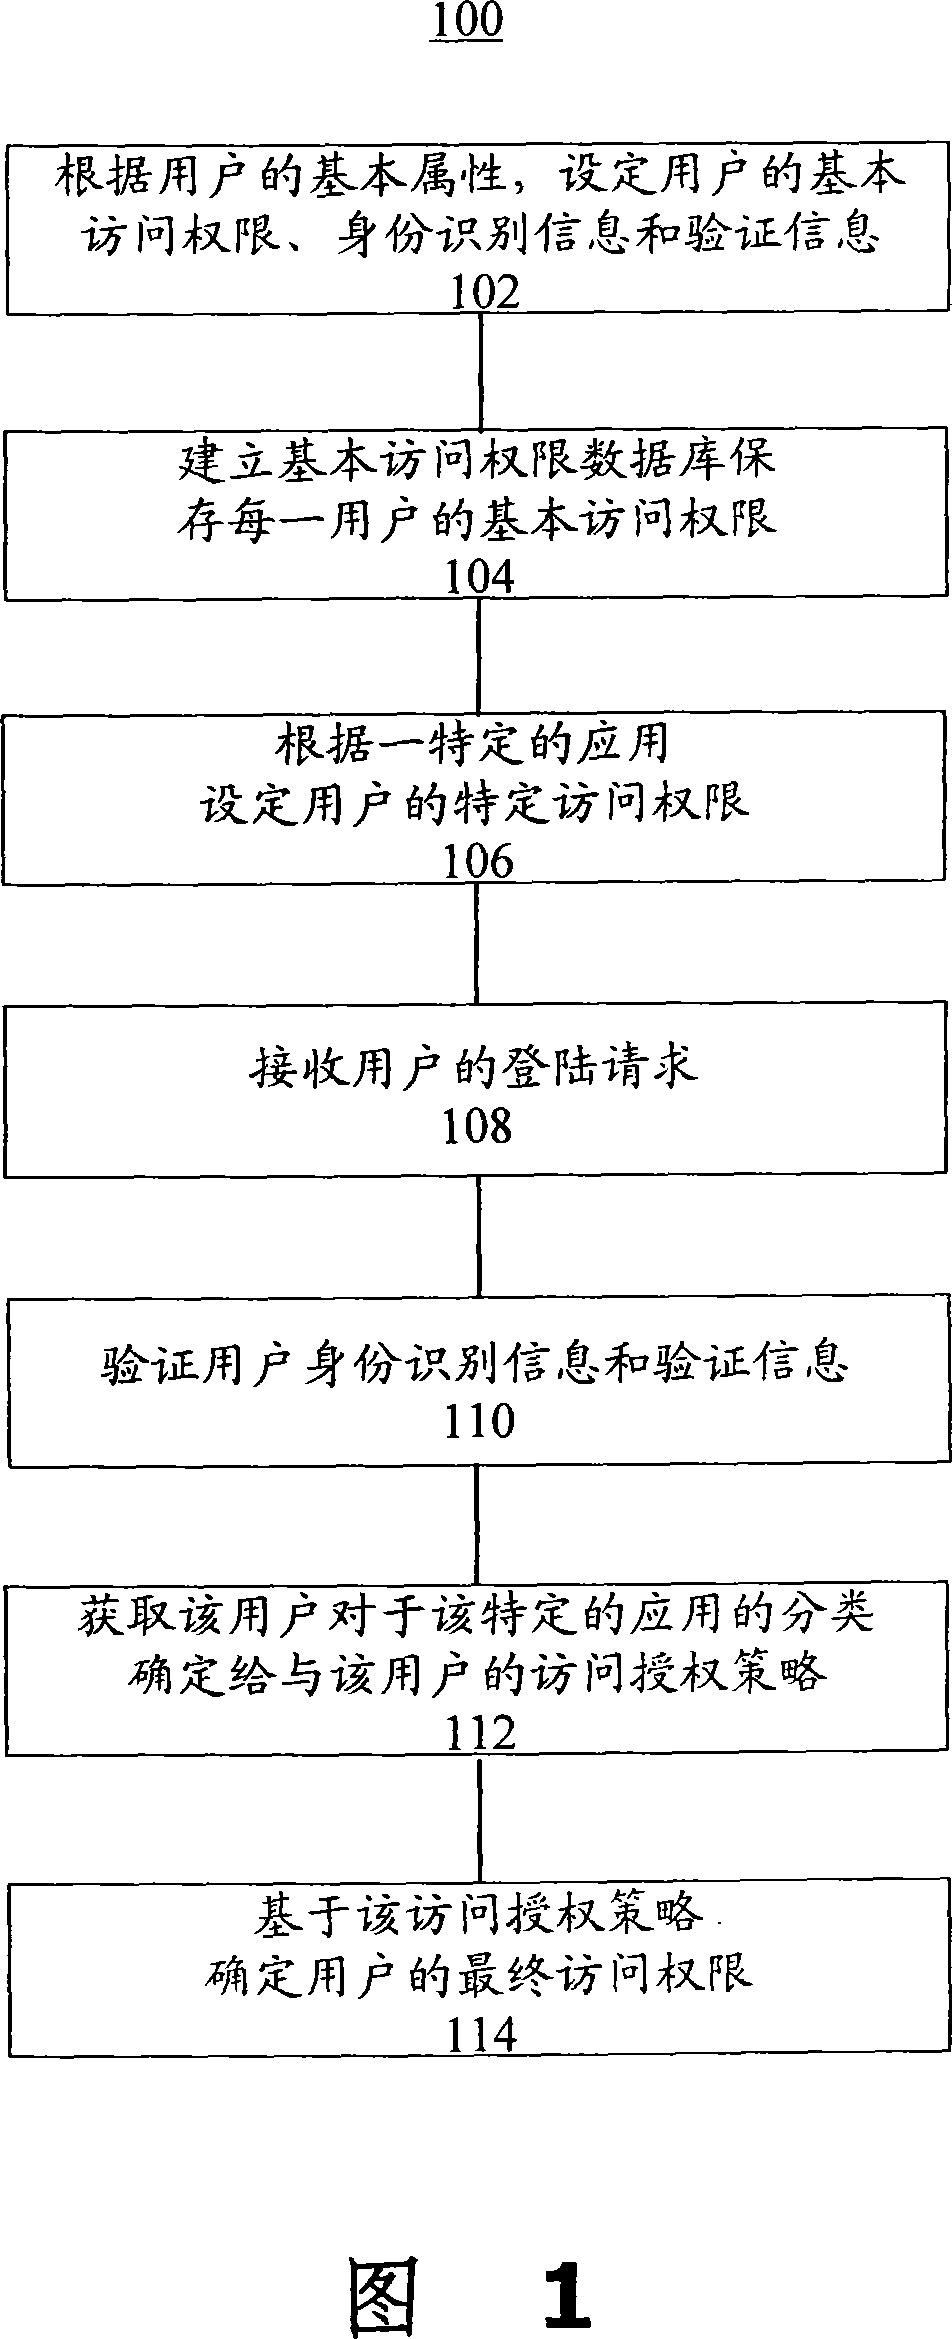 User access authorization management method and system